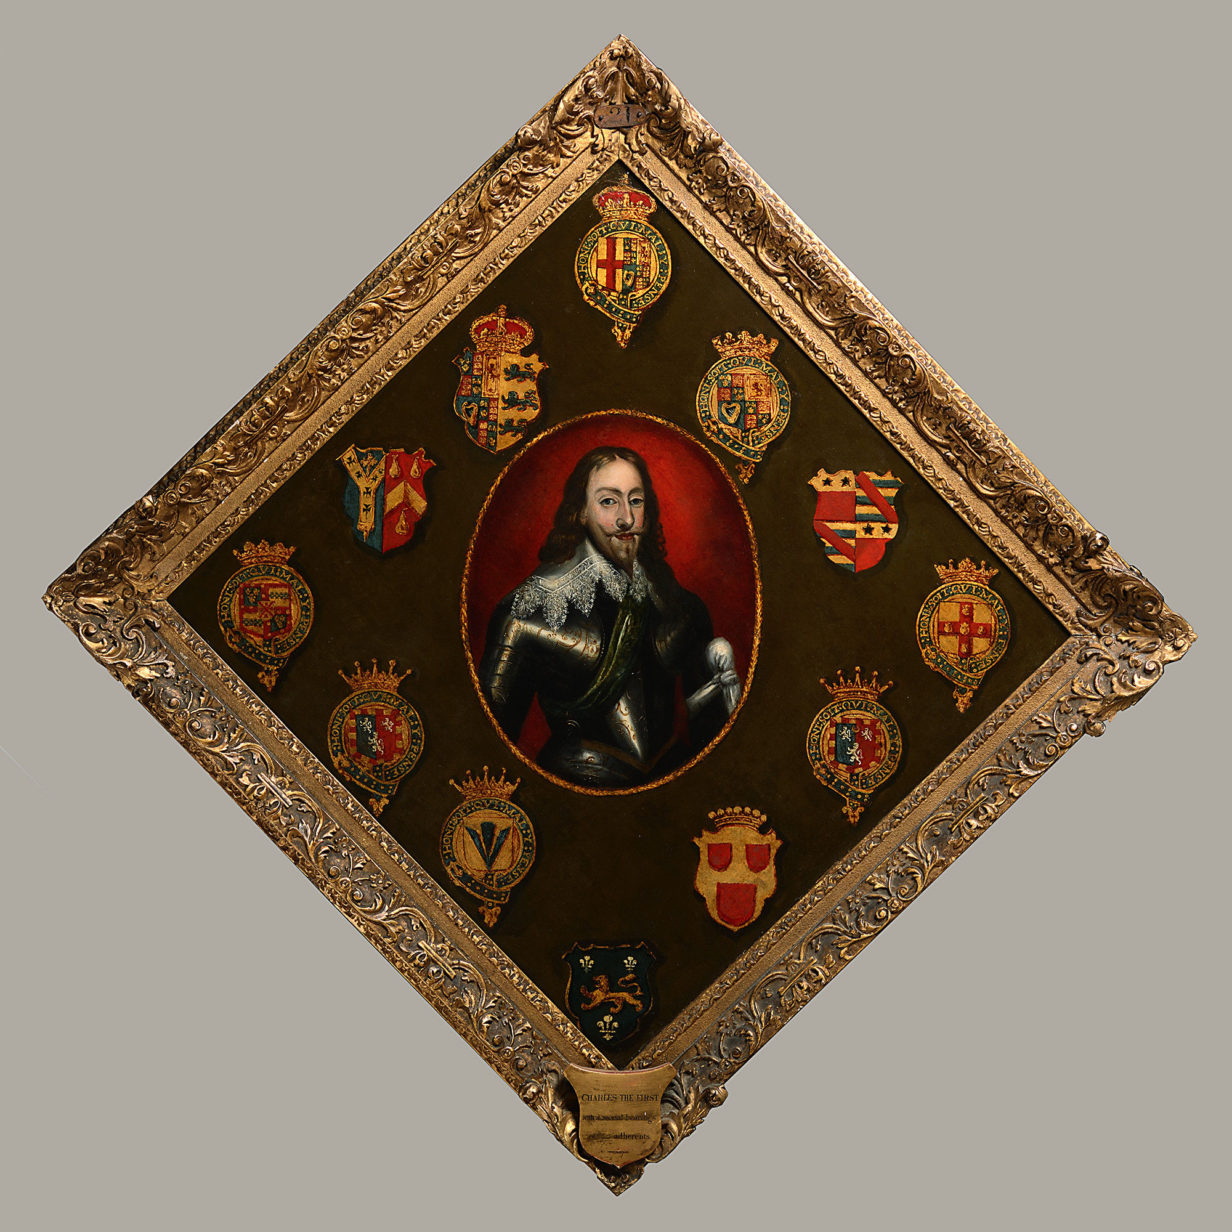 A rare 18th century portrait hatchment of charles i and his adherents